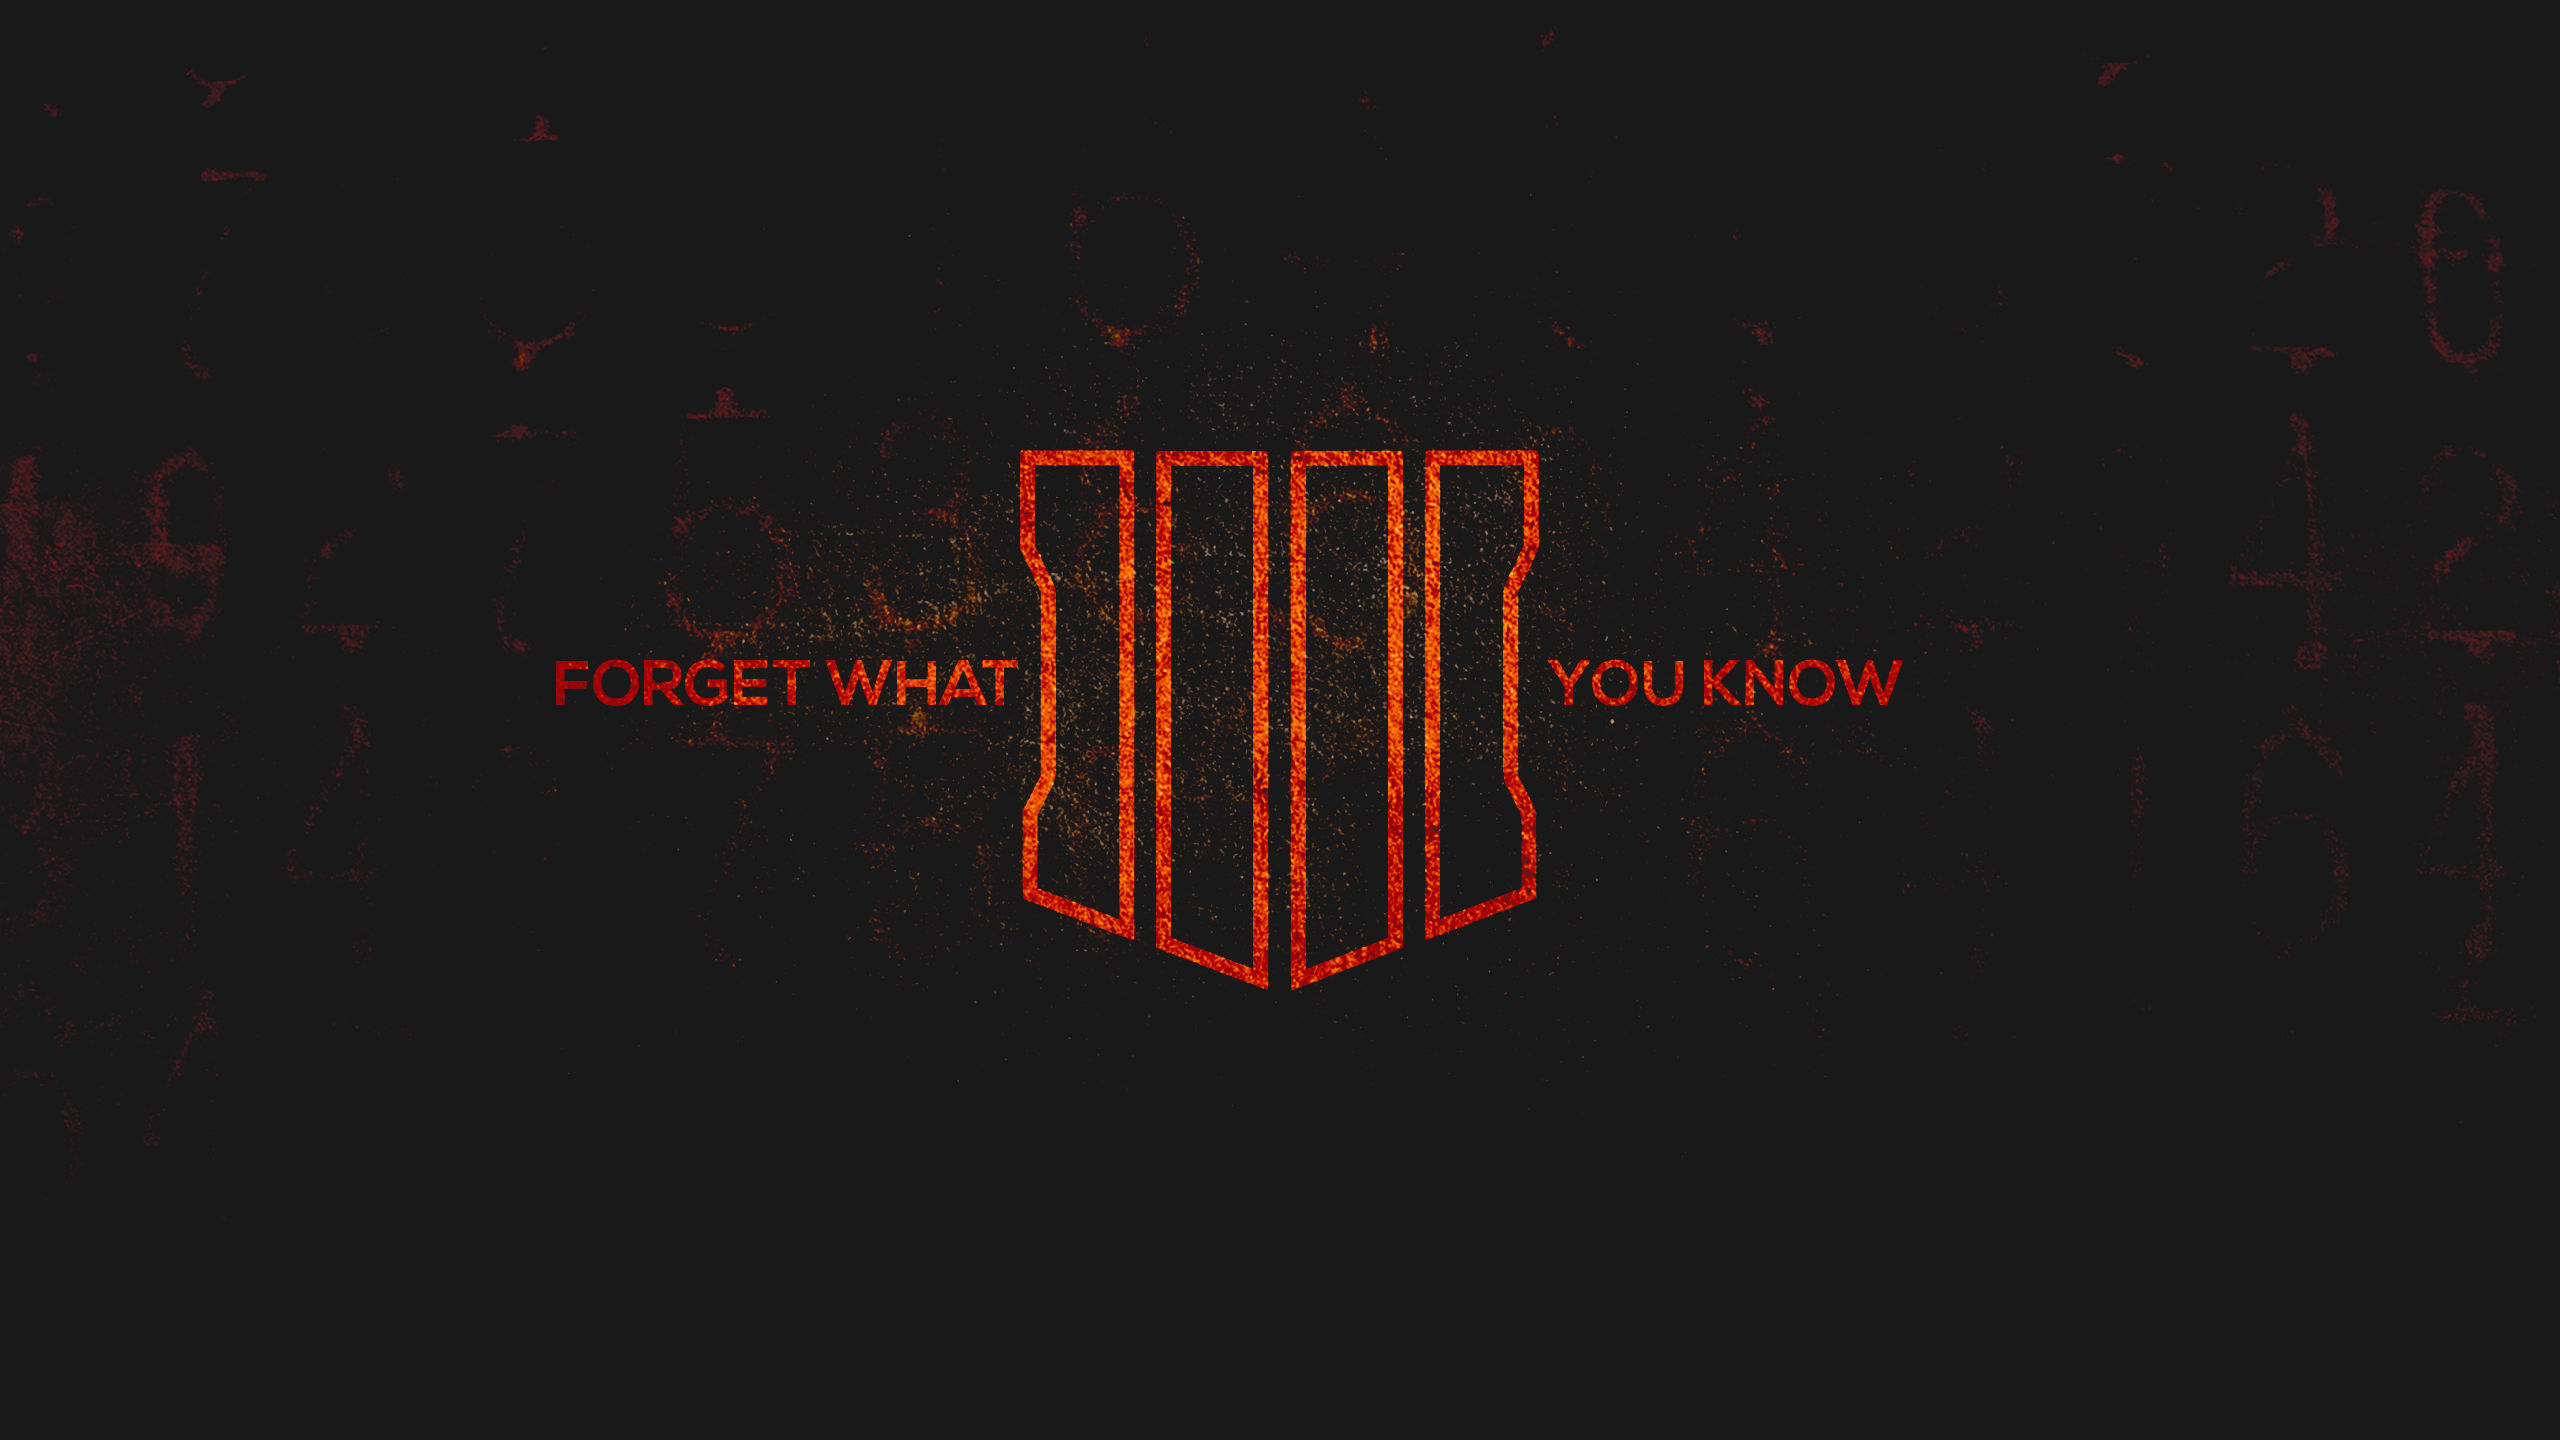 5120x1440p 329 call of duty black ops 4 background